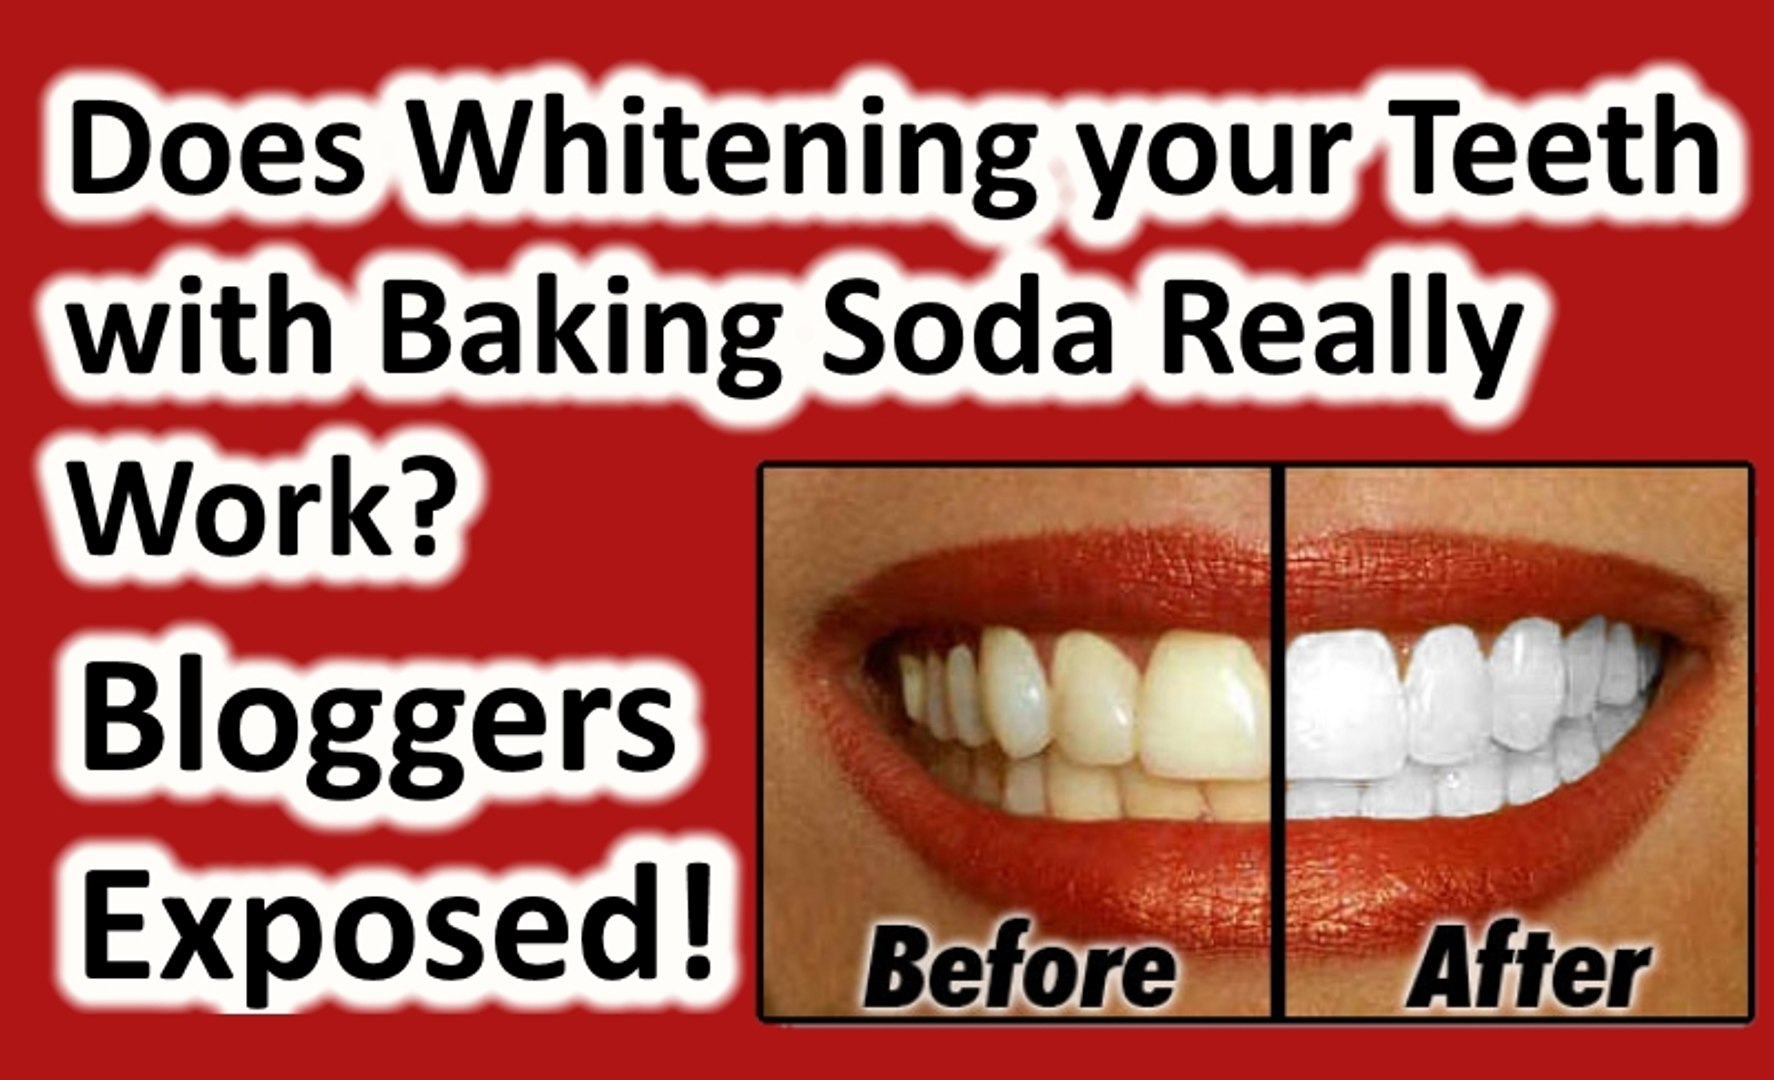 Can I whiten my teeth at home with Baking Soda: Debunked! Does DIY whitening  work? - video Dailymotion